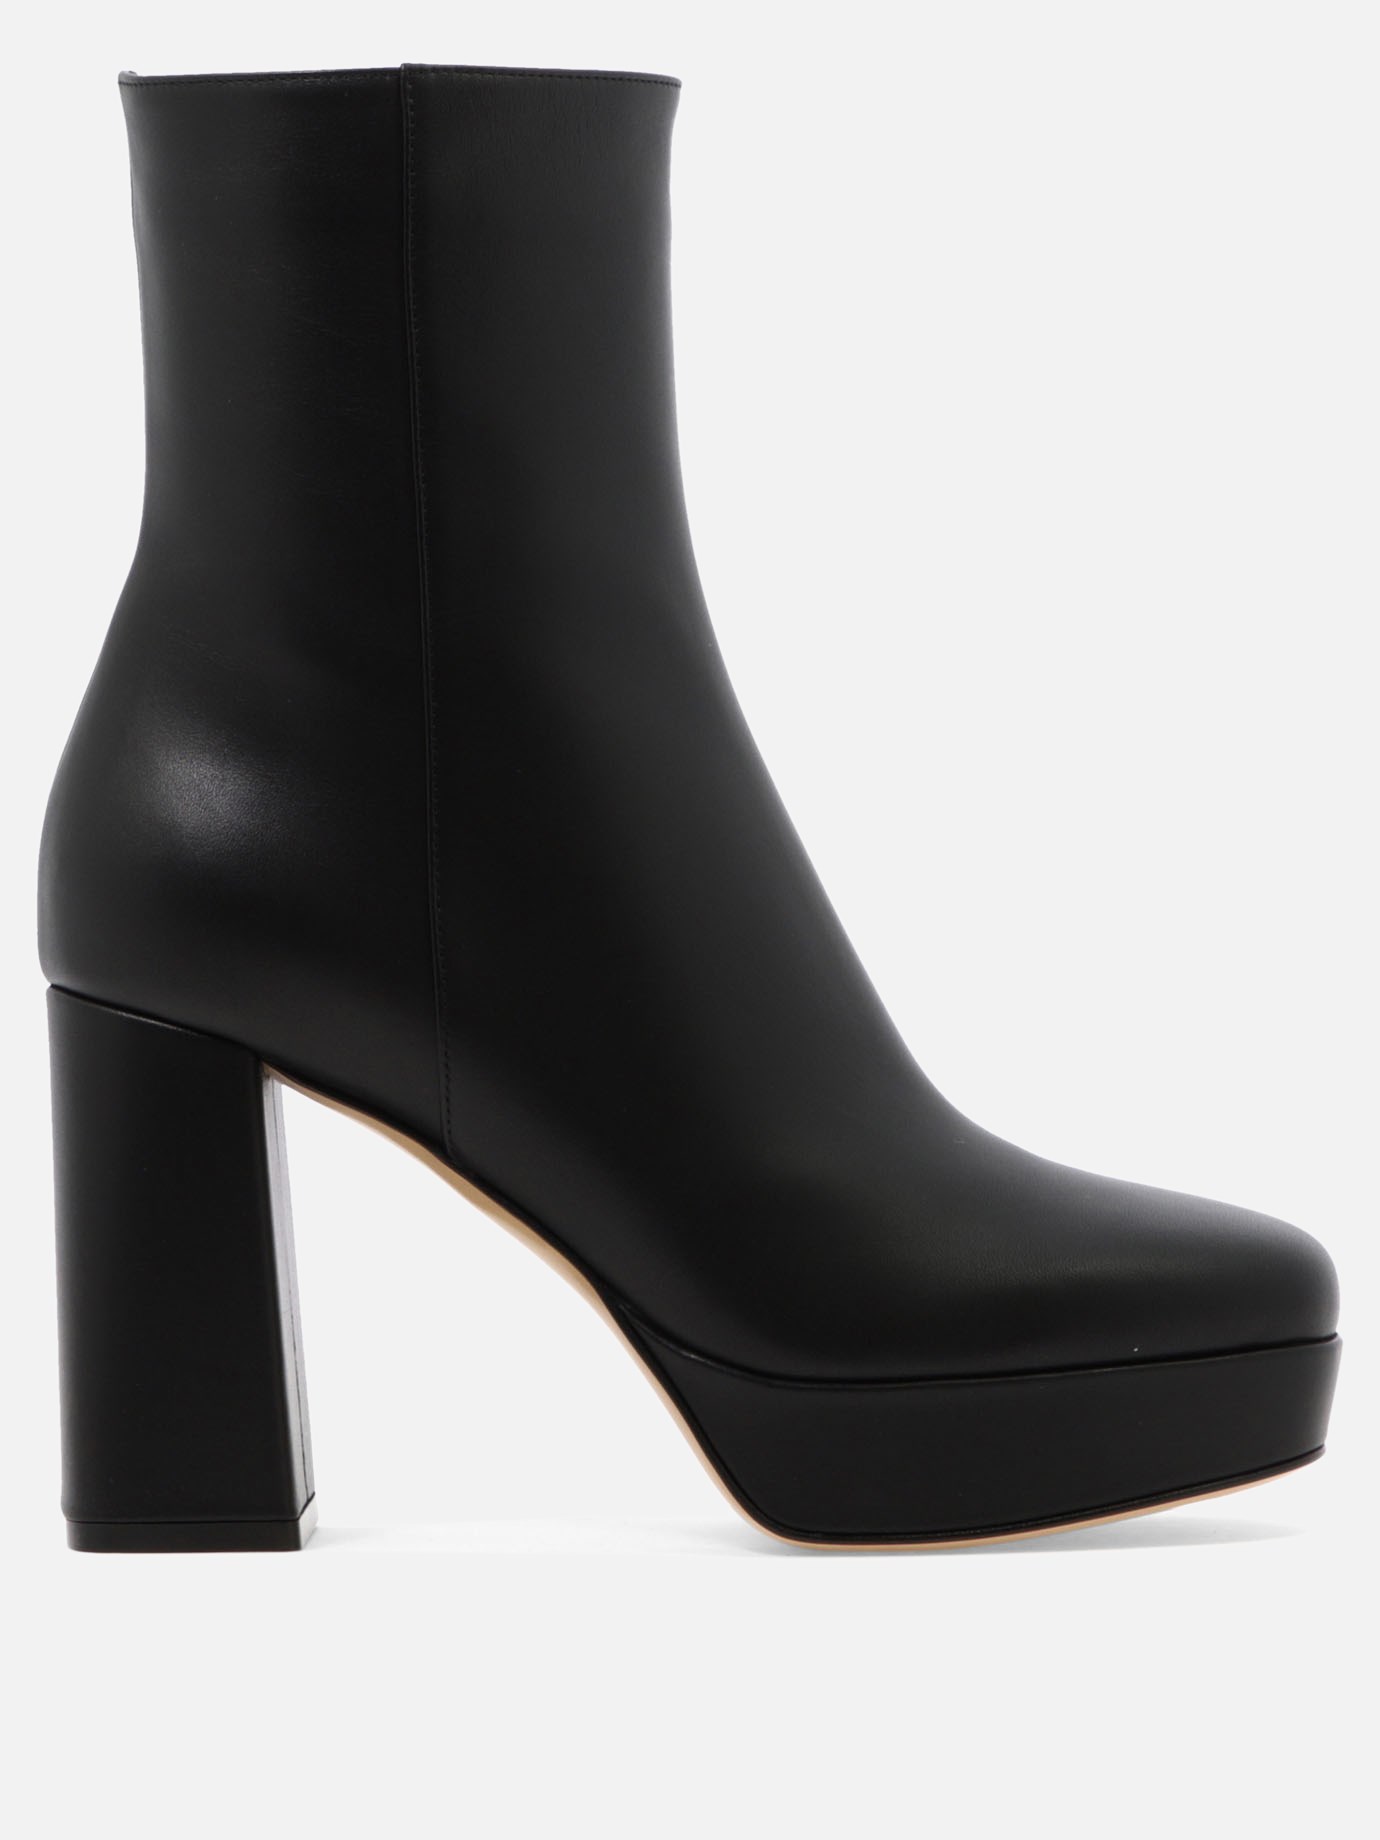  Daisen  ankle bootsby Gianvito Rossi - 5